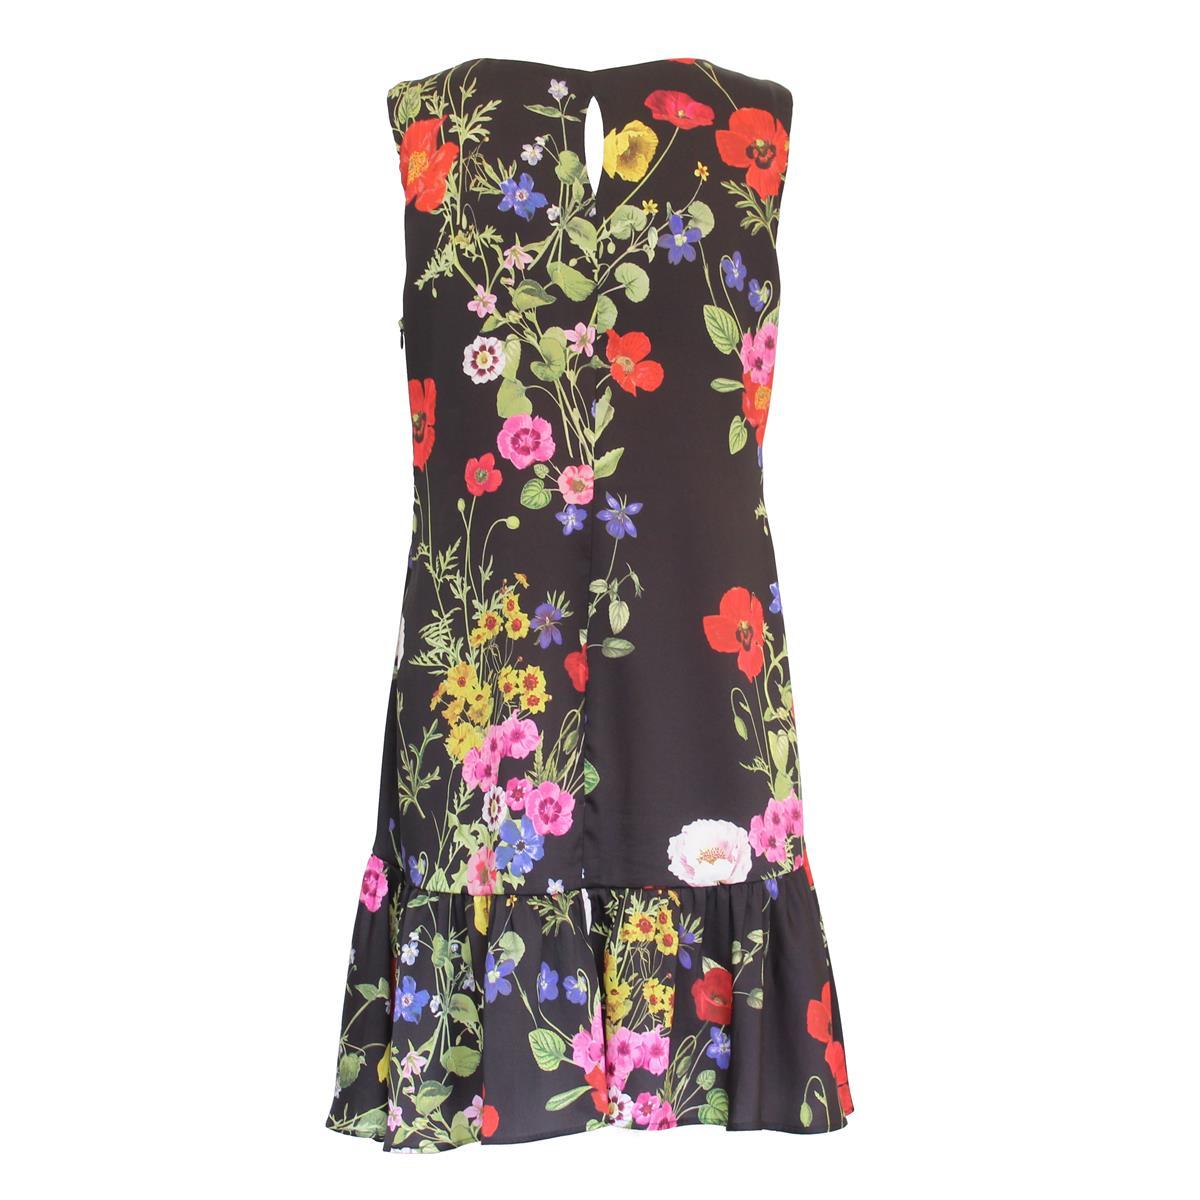 Blugirl
Polyester
Sleeveless
Black base
Multicolored floral pattern
Total lenght (shoulder/hem) cm 90 (35.4 inches)
Worldwide express shipping included in the price !